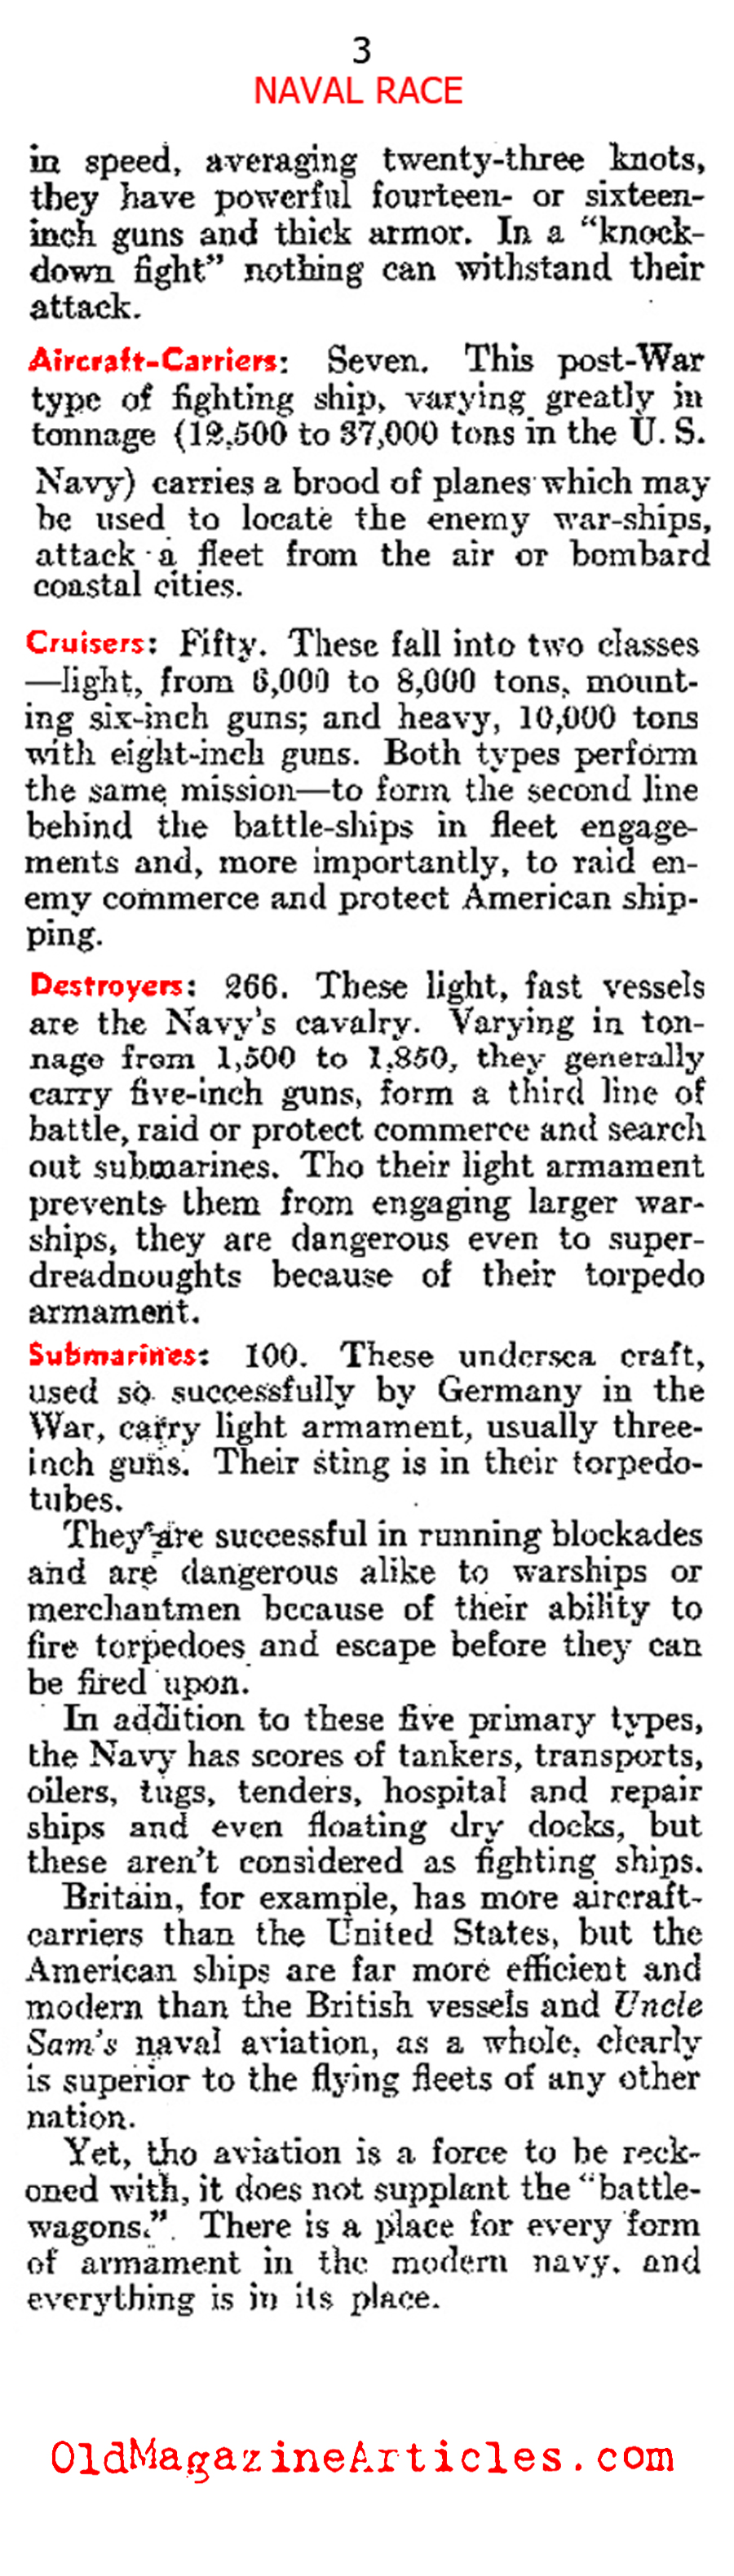 The World Navies Expand (The Literary Digest, 1937)